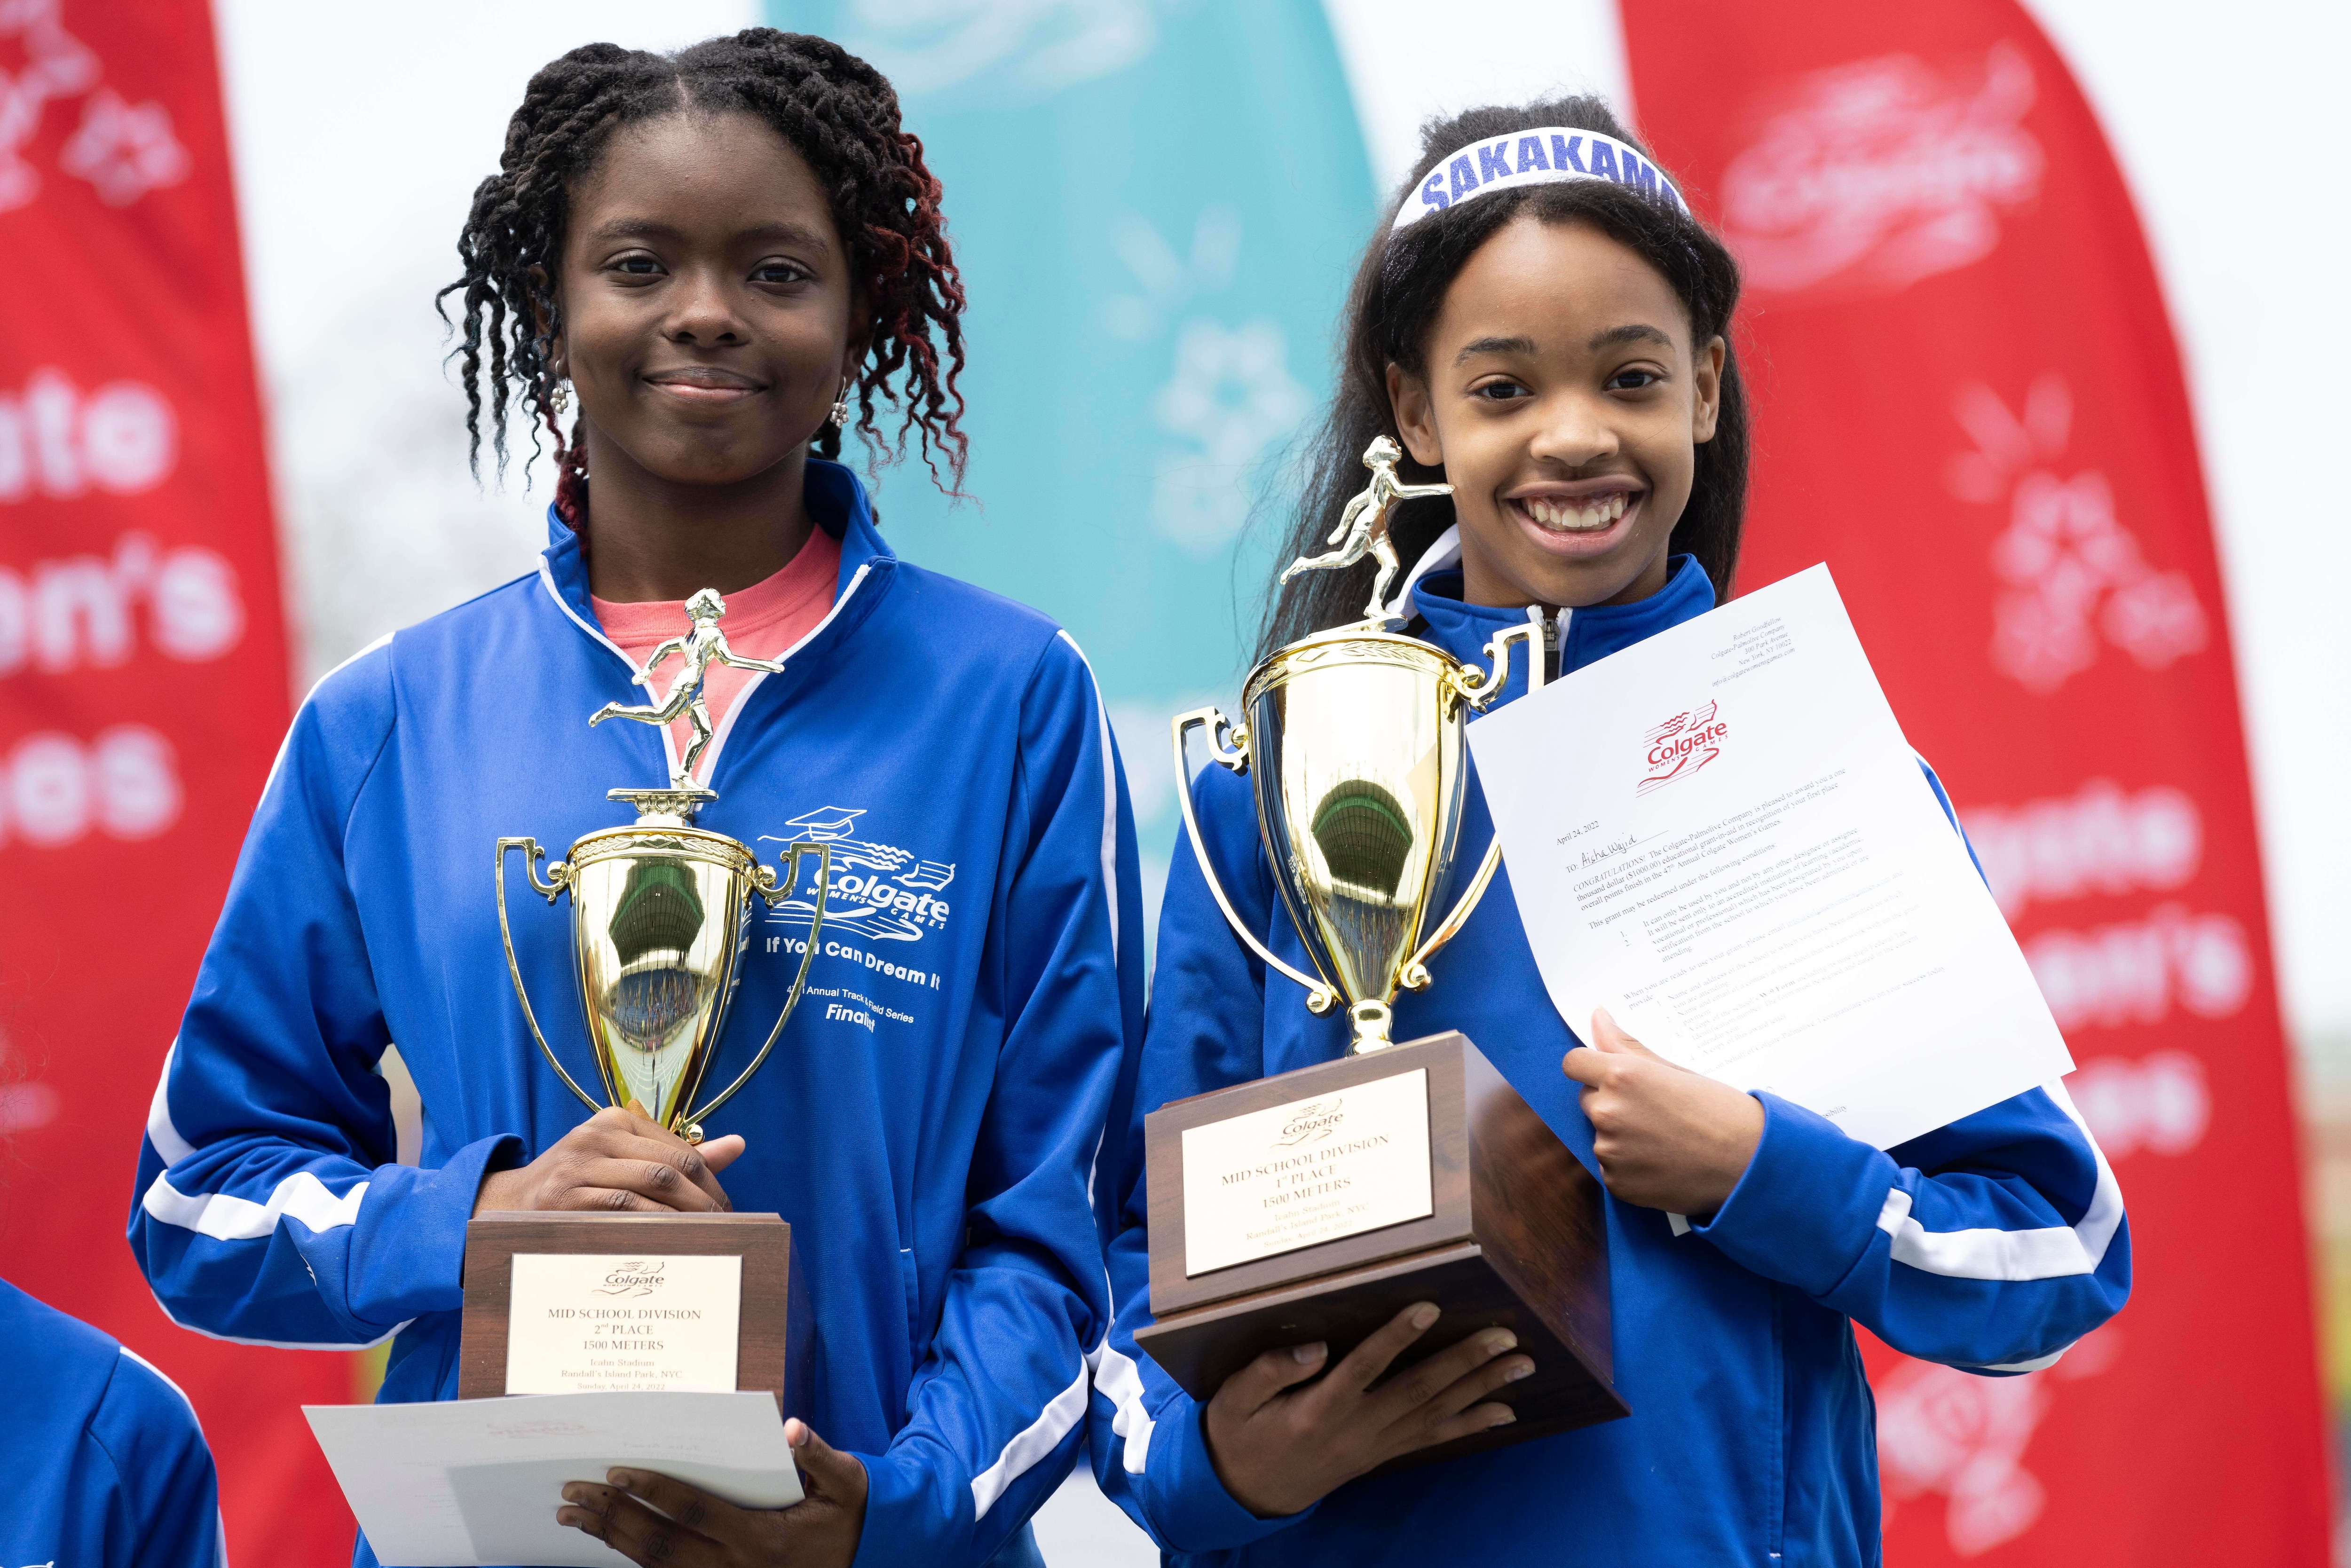 Athletes and competitors awarded medals and educational scholarships from Colgate Women's Games .